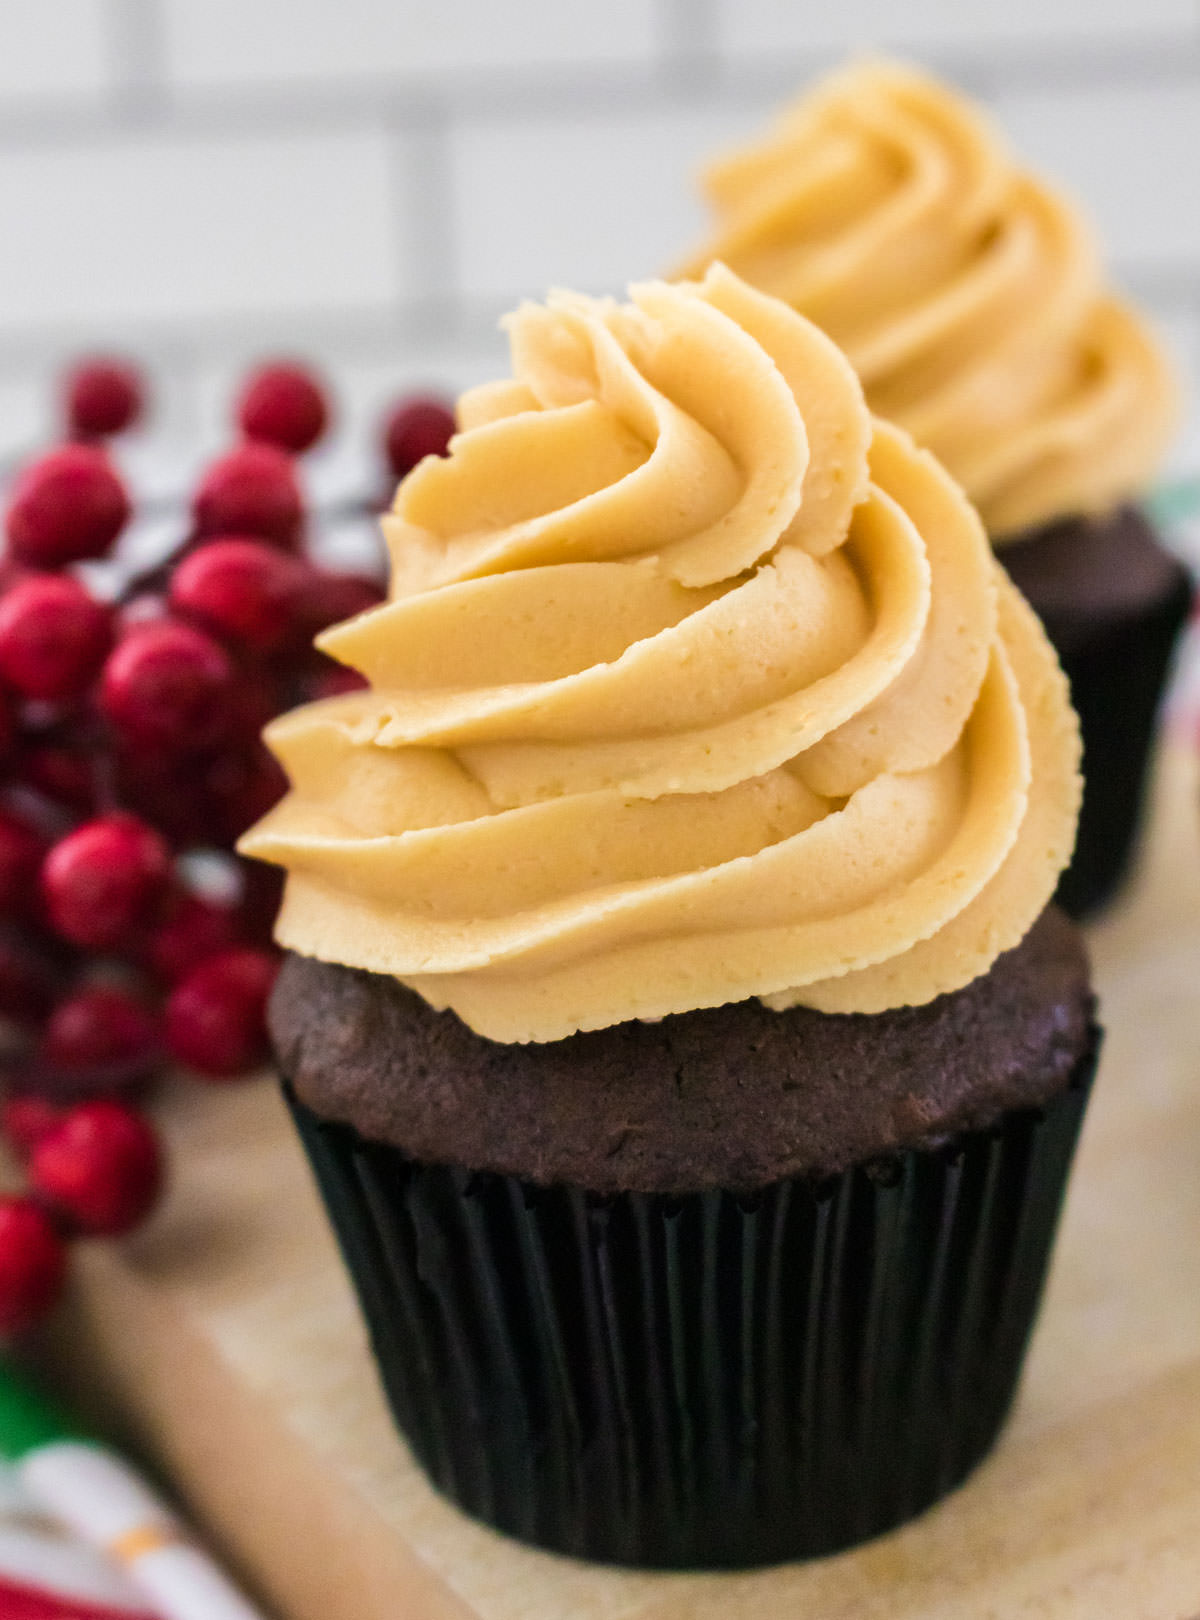 Closeup on a chocolate cupcake topped with The Best Butter Rum Buttercream Frosting sitting on a cutting board.